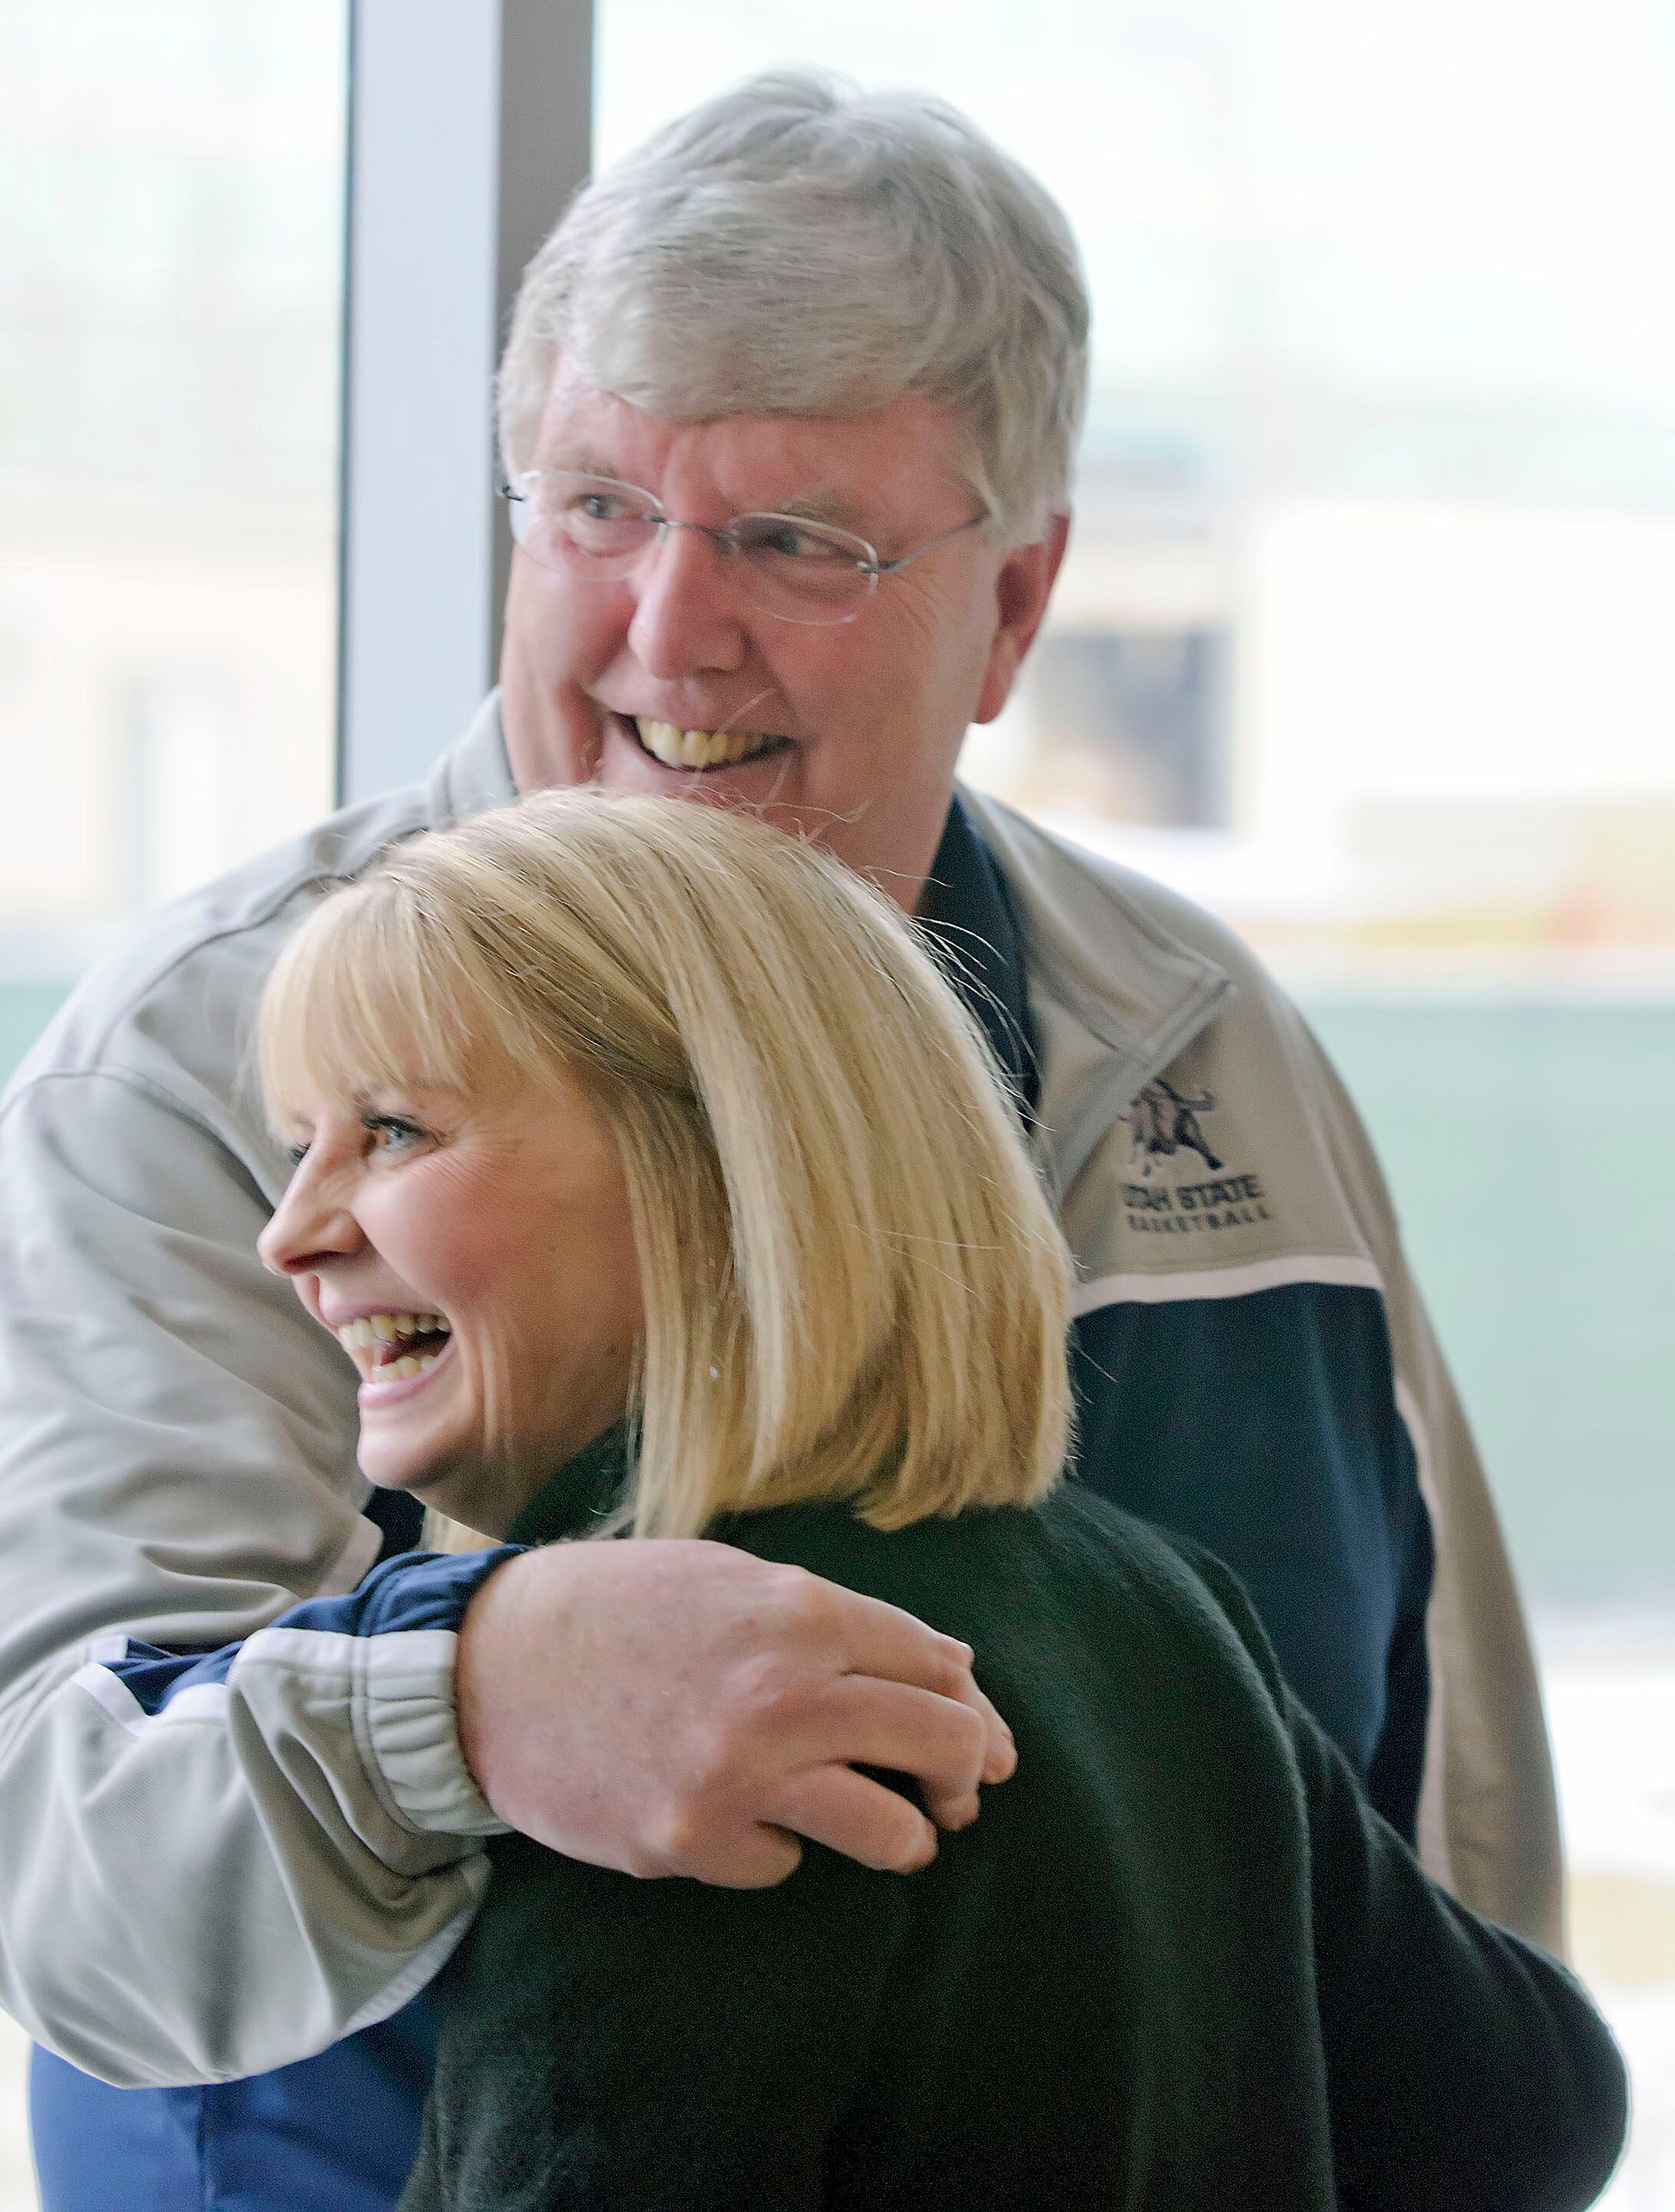 (Eli Lucero | AP Photo vs The Herald Journal) Utah State basketball coach Stew Morrill stands next to his wife Vicki Morrill following a news conference on Jan. 9, 2014, in Logan.